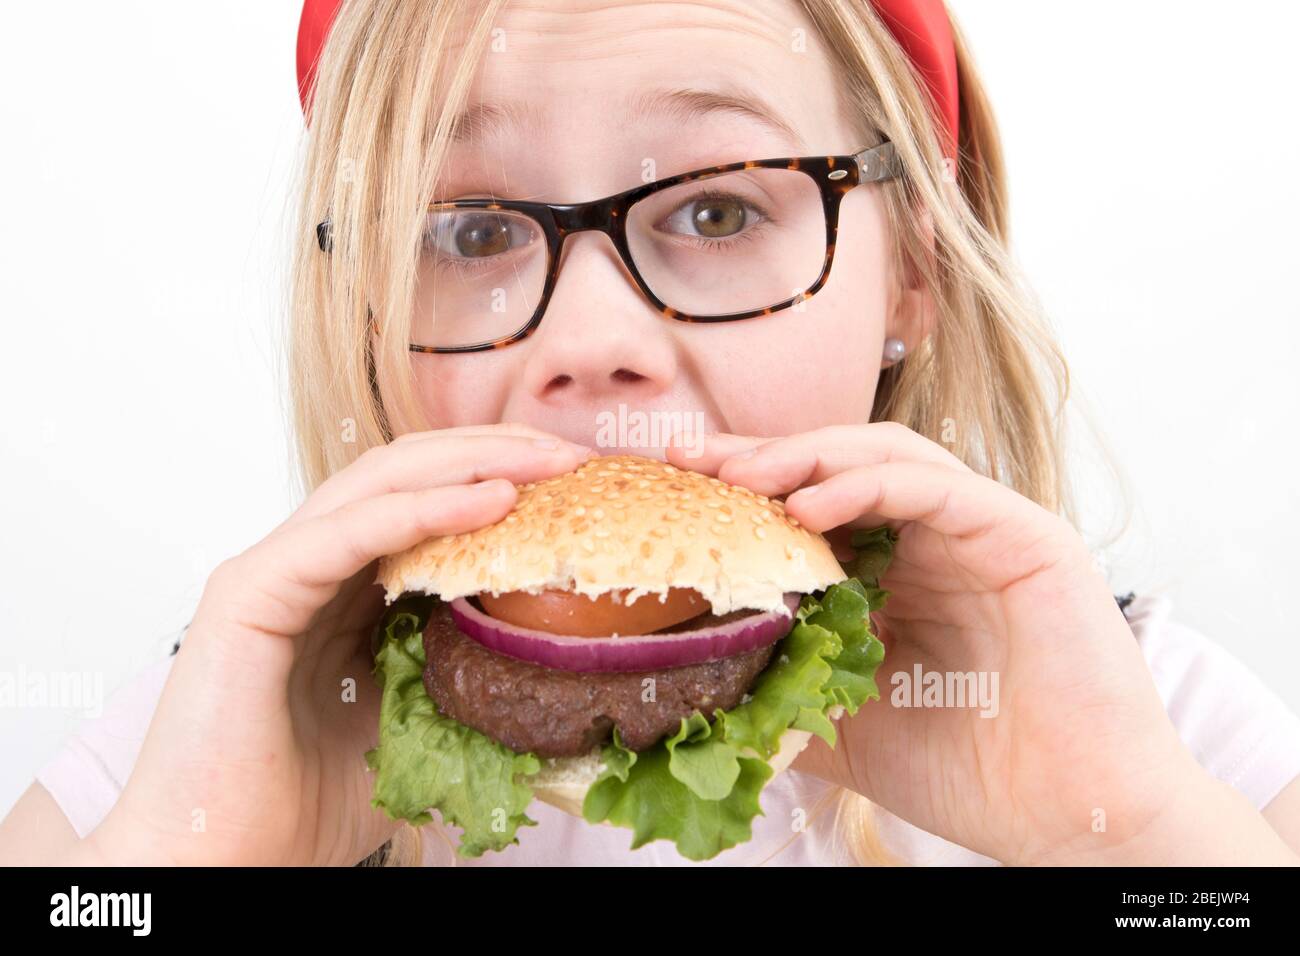 Young blonde girl wearing glasses in a red Alice band eating a homemade burger Stock Photo